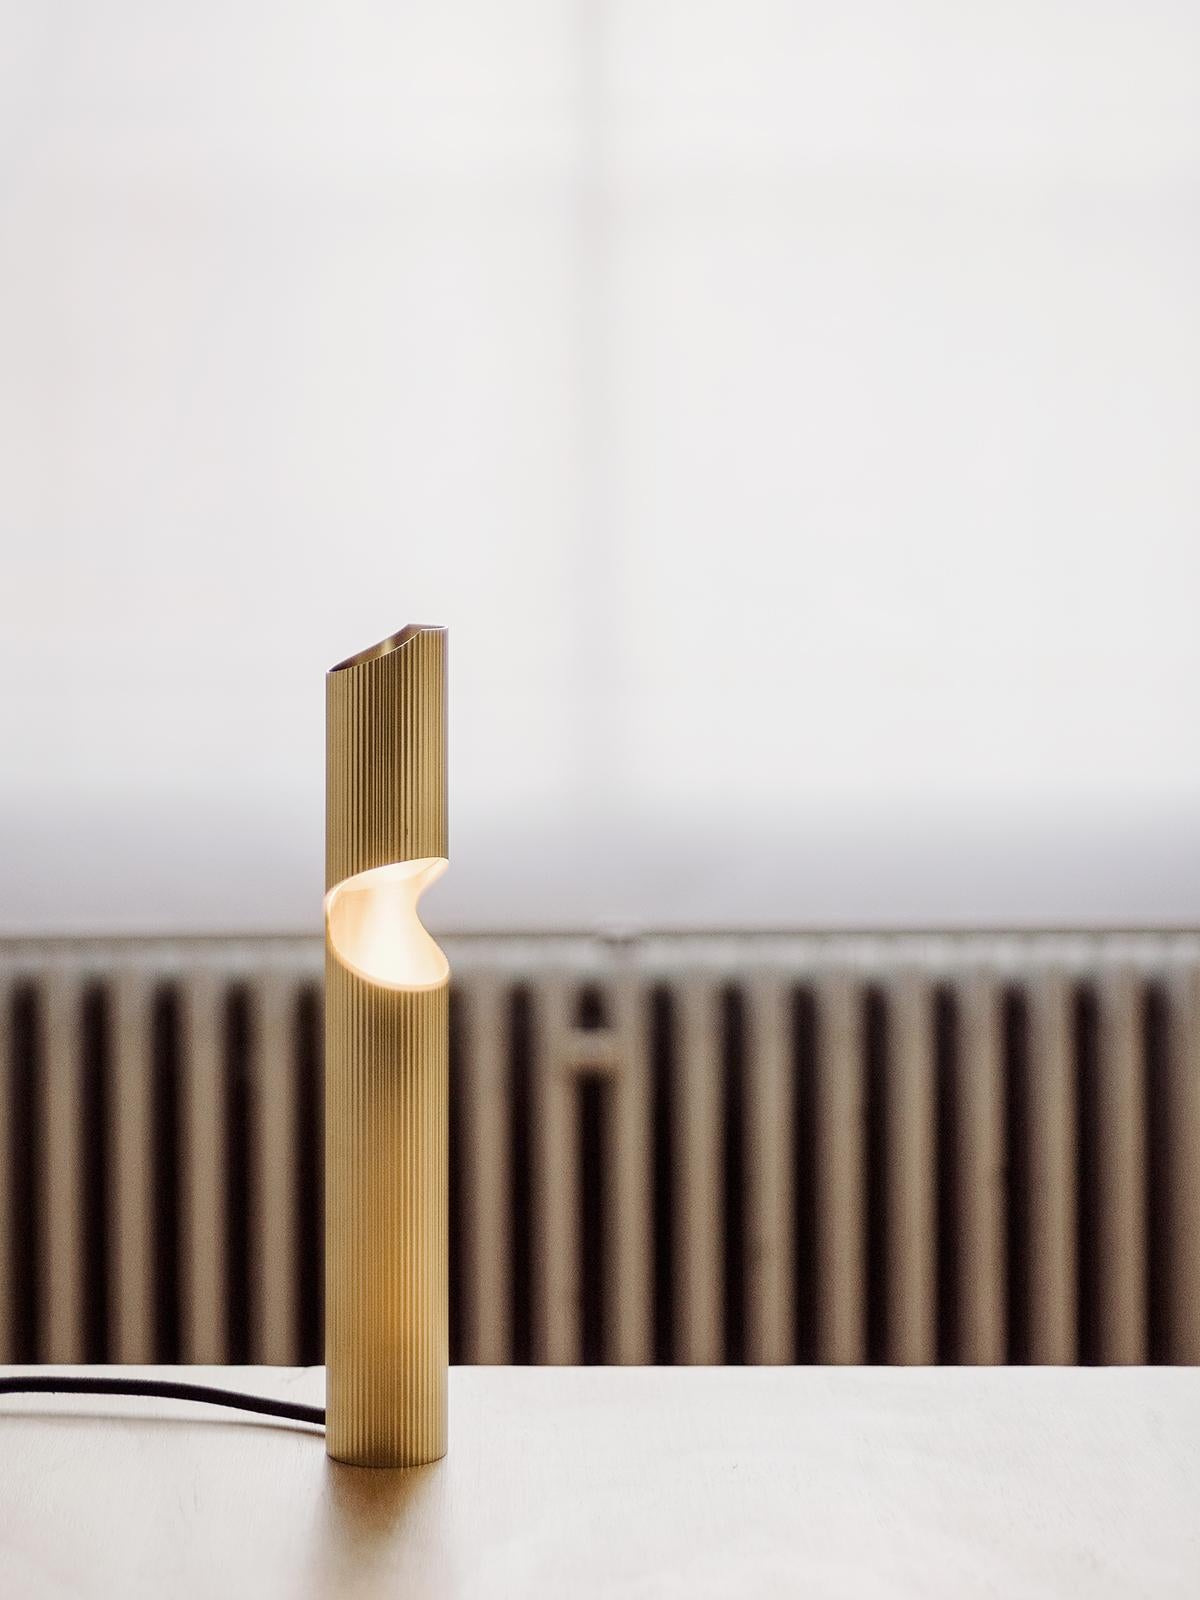 Armilla Table Lamp by Scattered Disc Objects
Dimensions: Ø 5 x H 33.5 cm. 
Materials: brass striped pipes, brass mirror, aluminum, LED spot light.
Driver: 12V 12W 1A, IP67.
Light source: 1x 4.2W Led GU4 MR11 Spot 2700K 345 lumen, replaceable.
Cable: